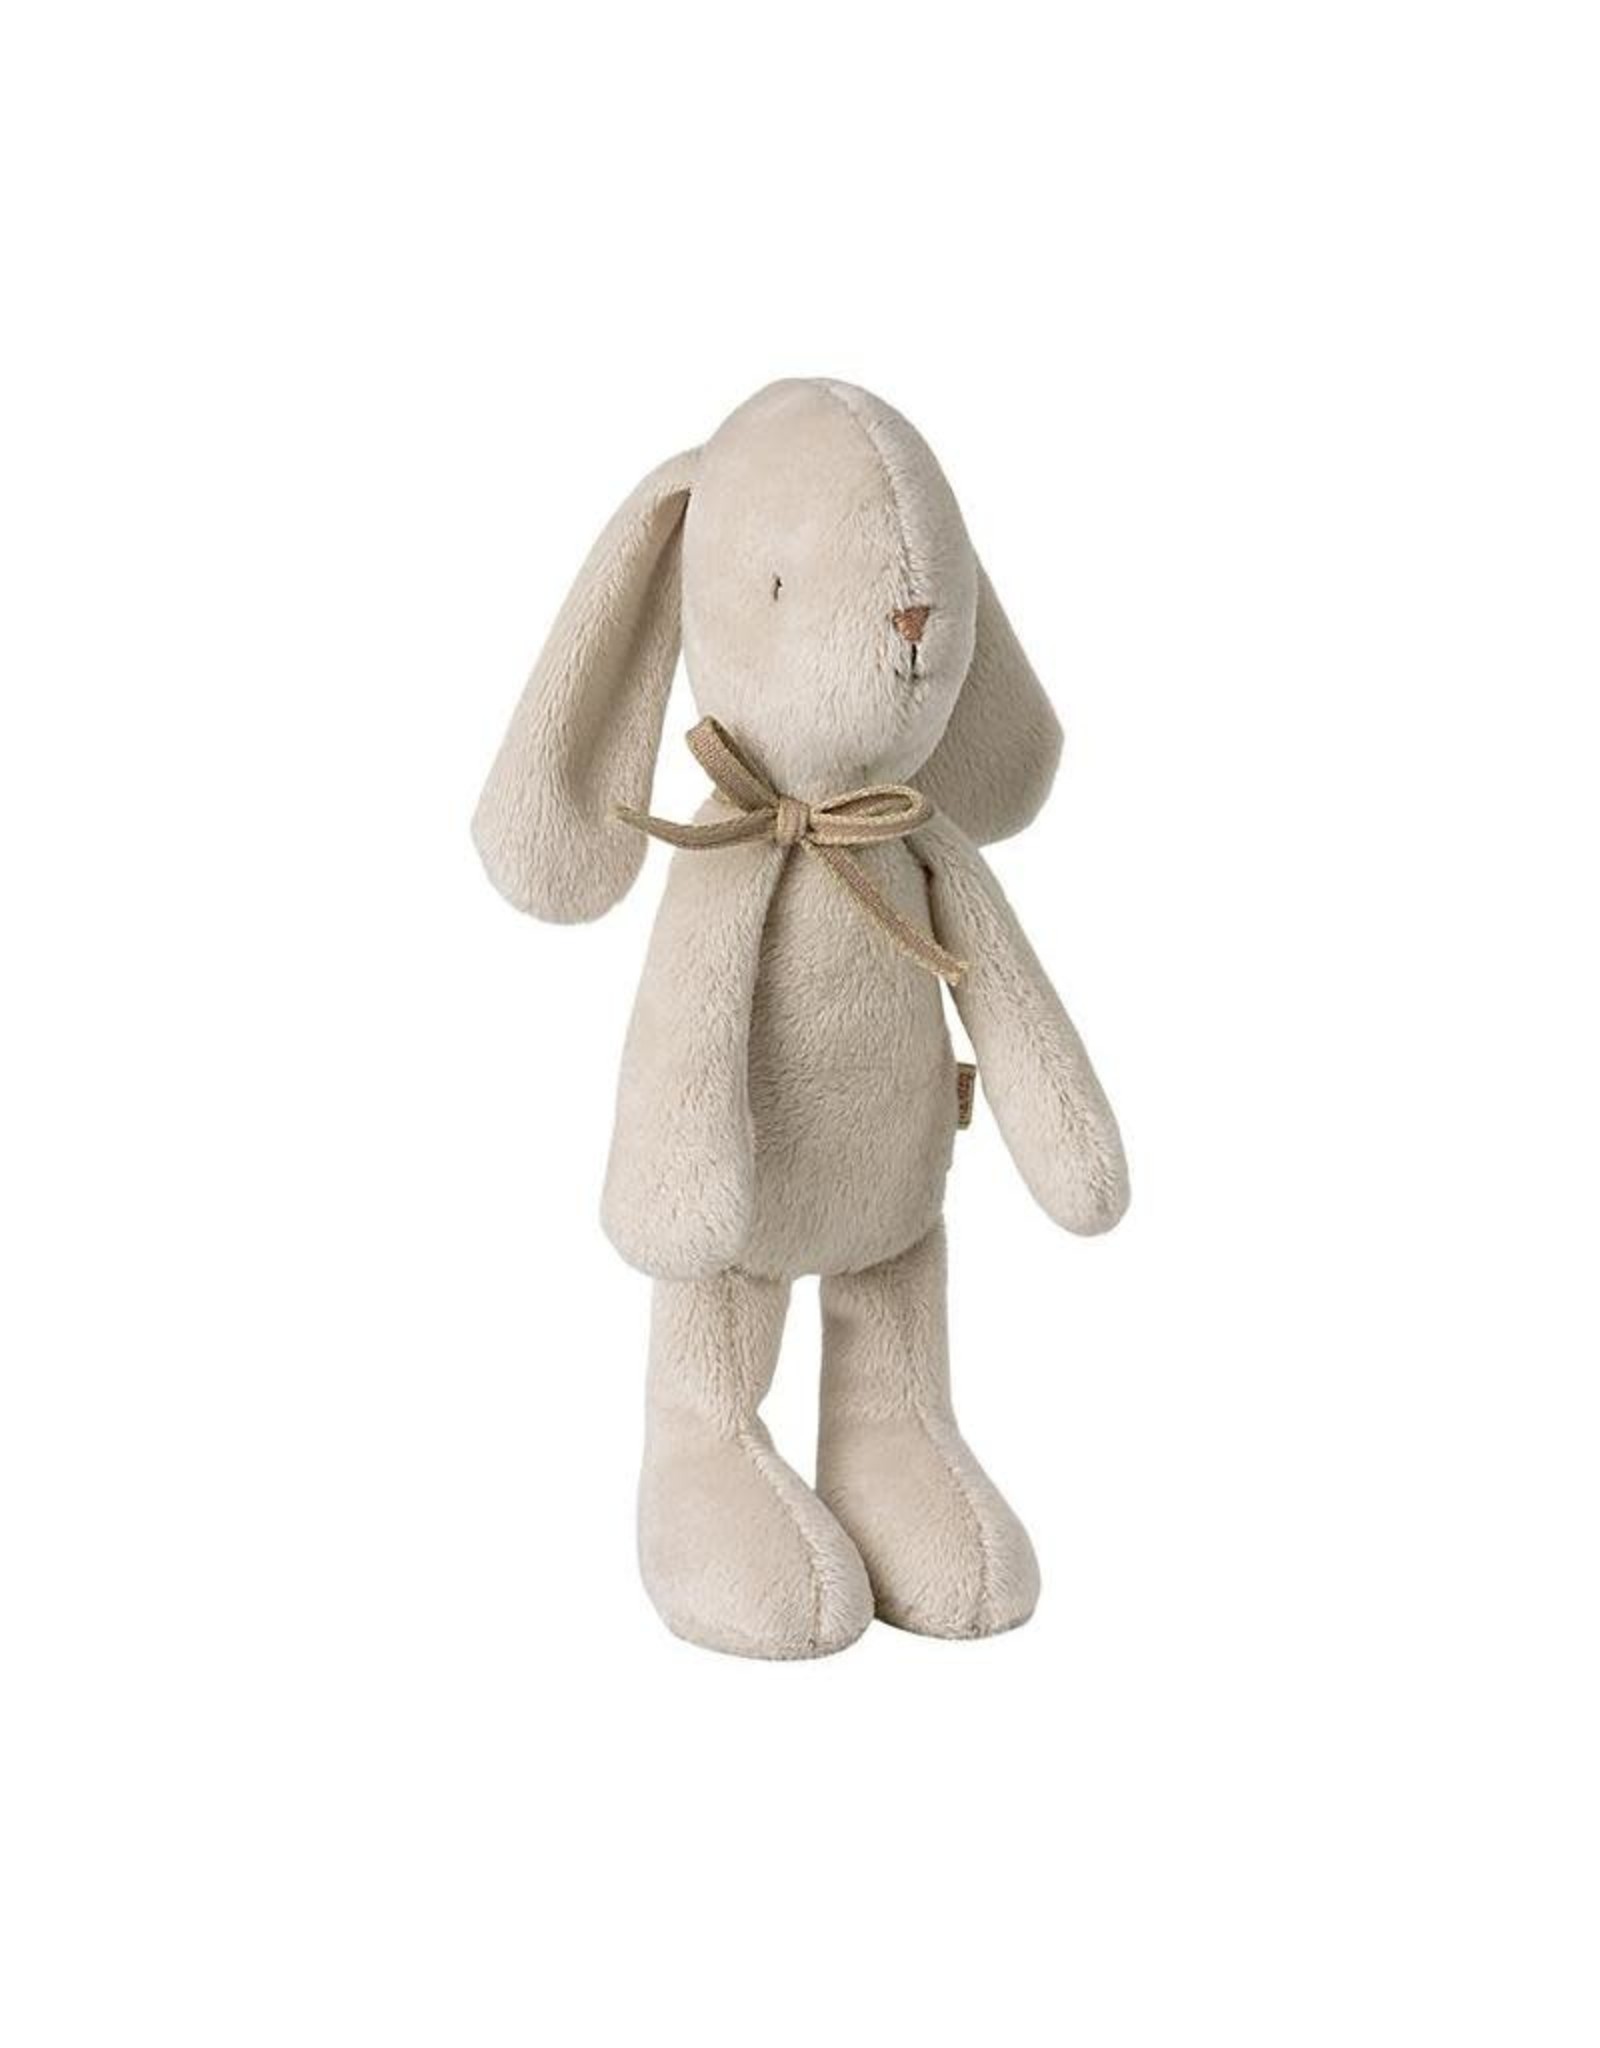 Maileg Small Soft Bunny - Off White